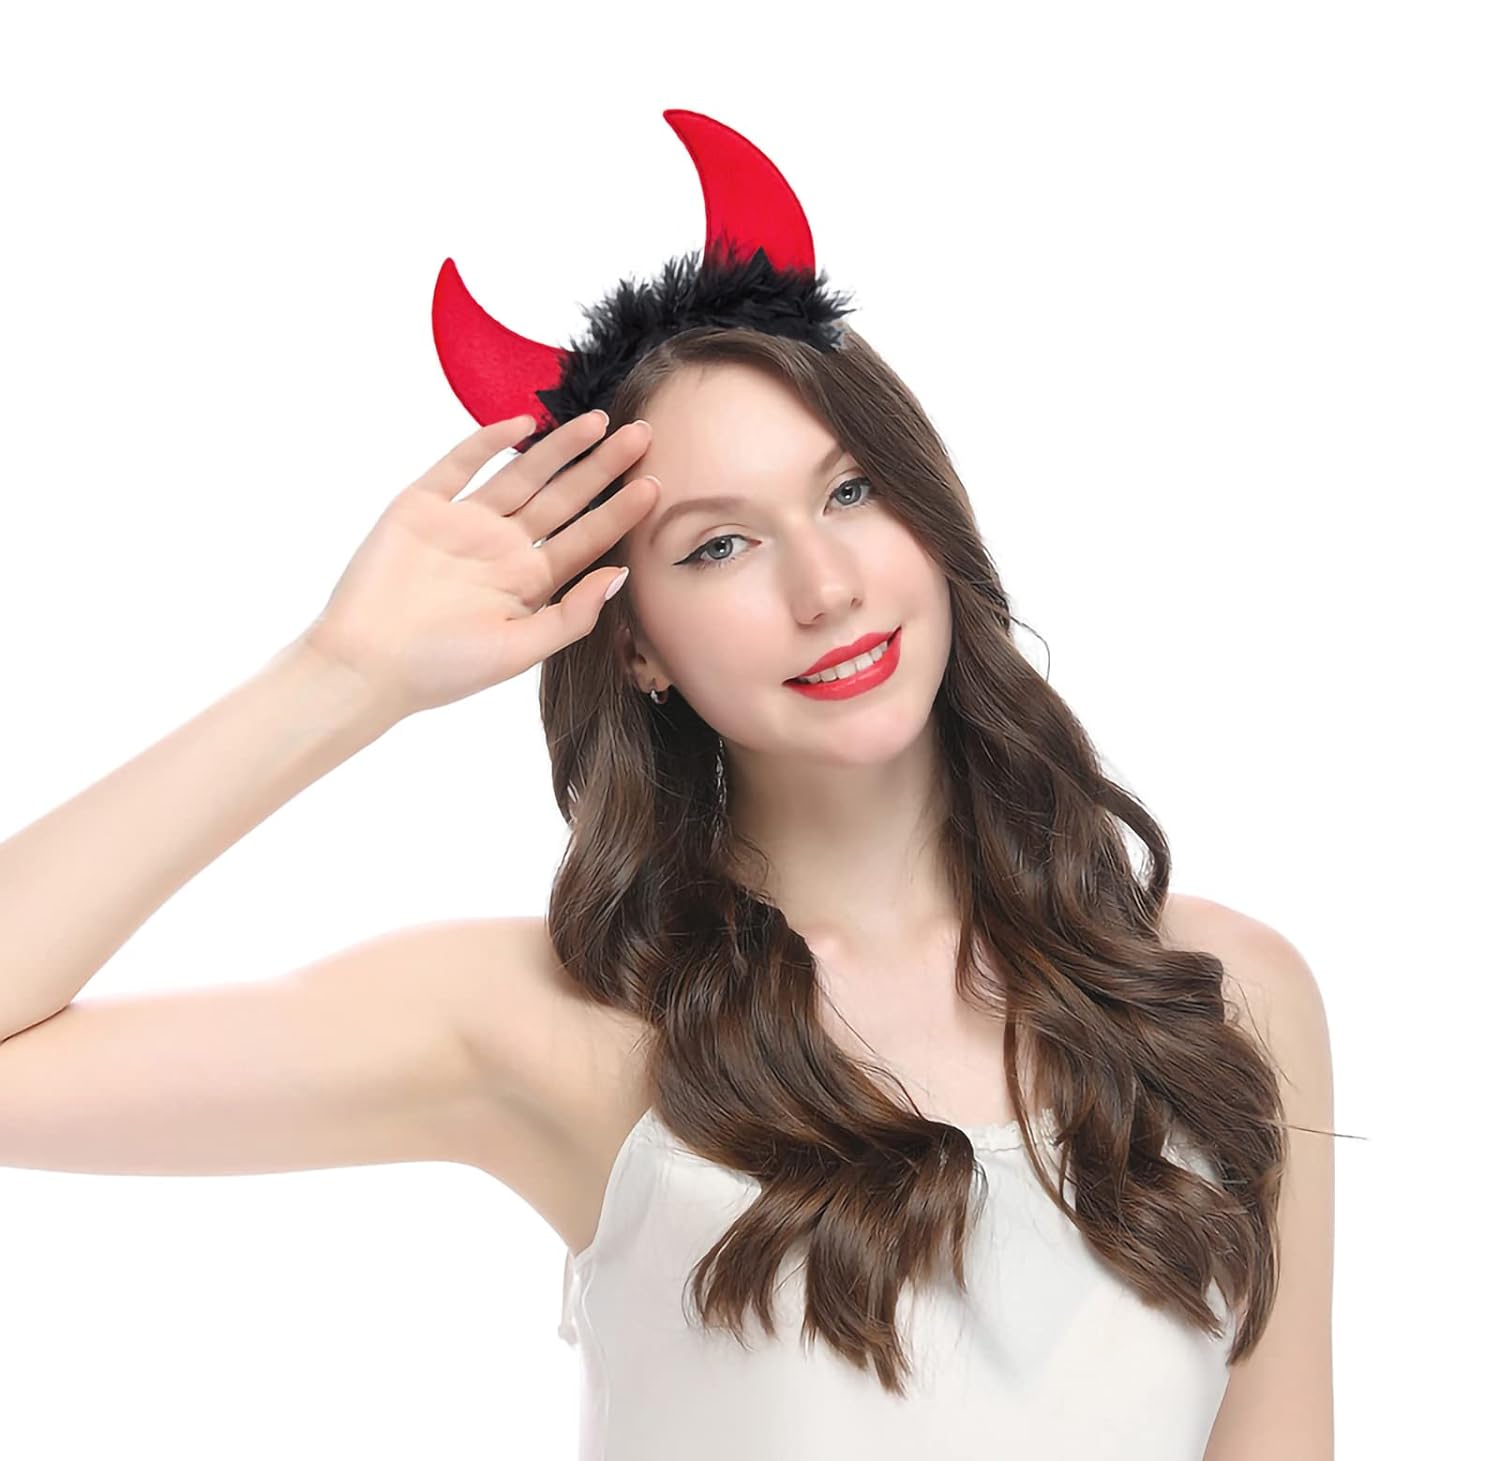 A young child with devil horns